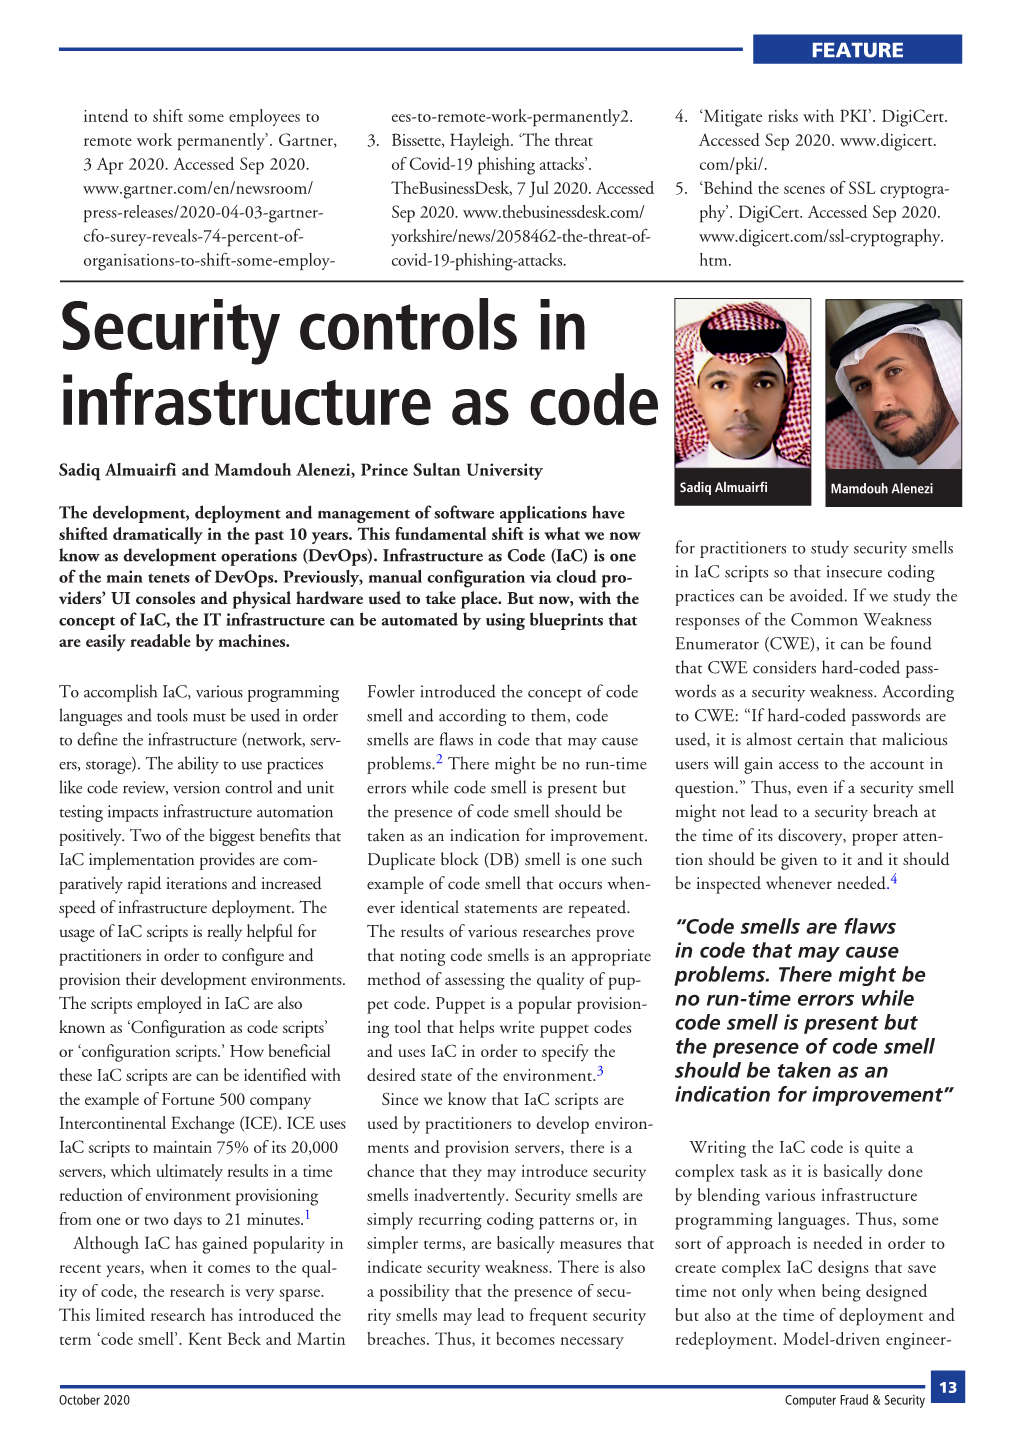 Security Controls in Infrastructure As Code